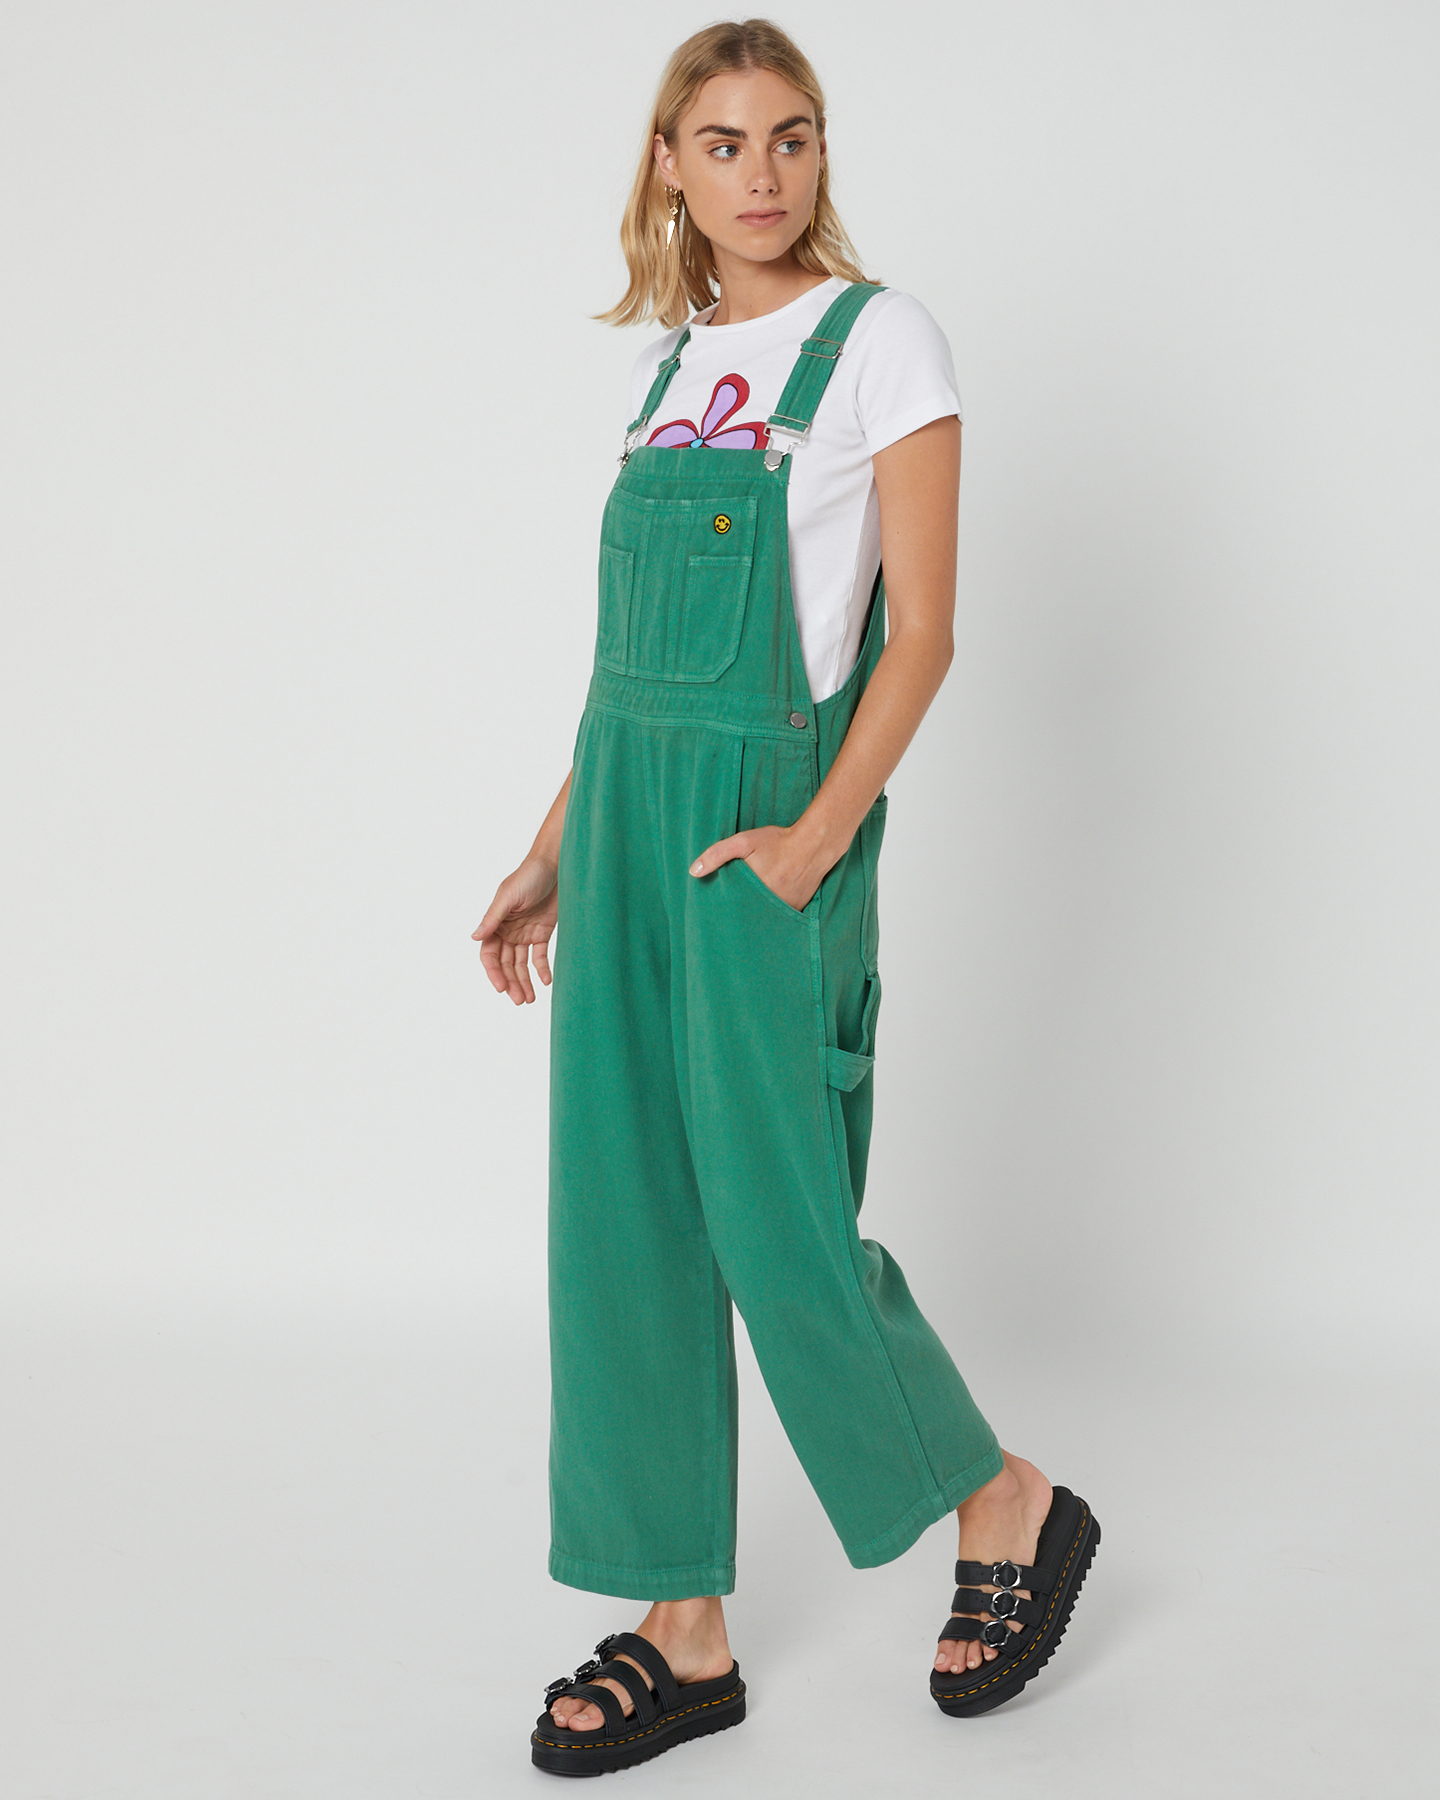 Misfit Heavenly People Overalls - Mint | SurfStitch